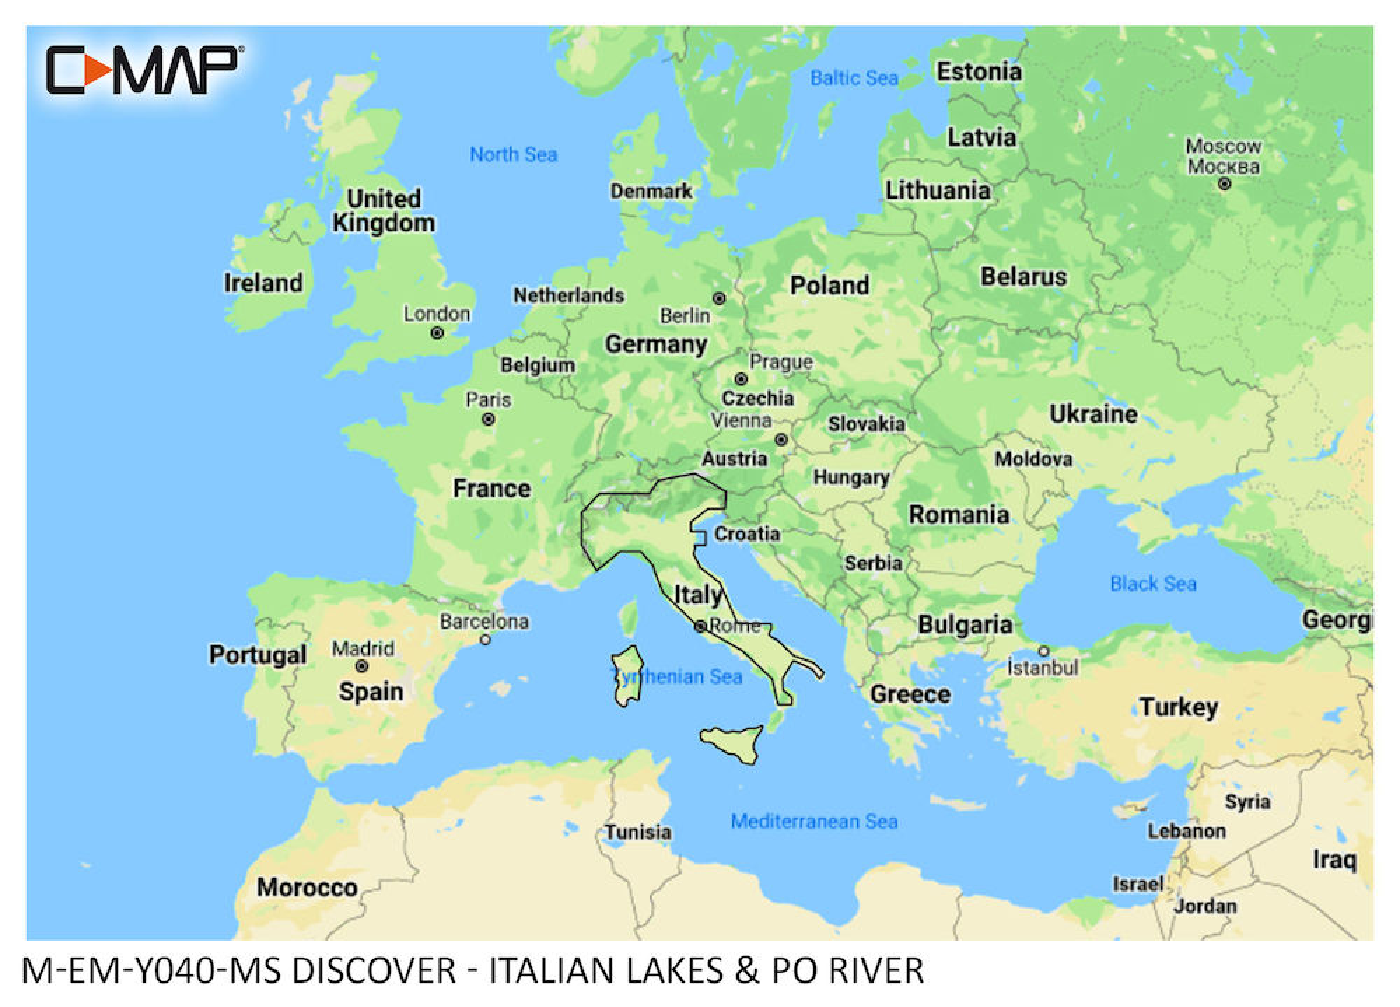 C-MAP Discover Italian Lakes and Po River M-EM-Y040